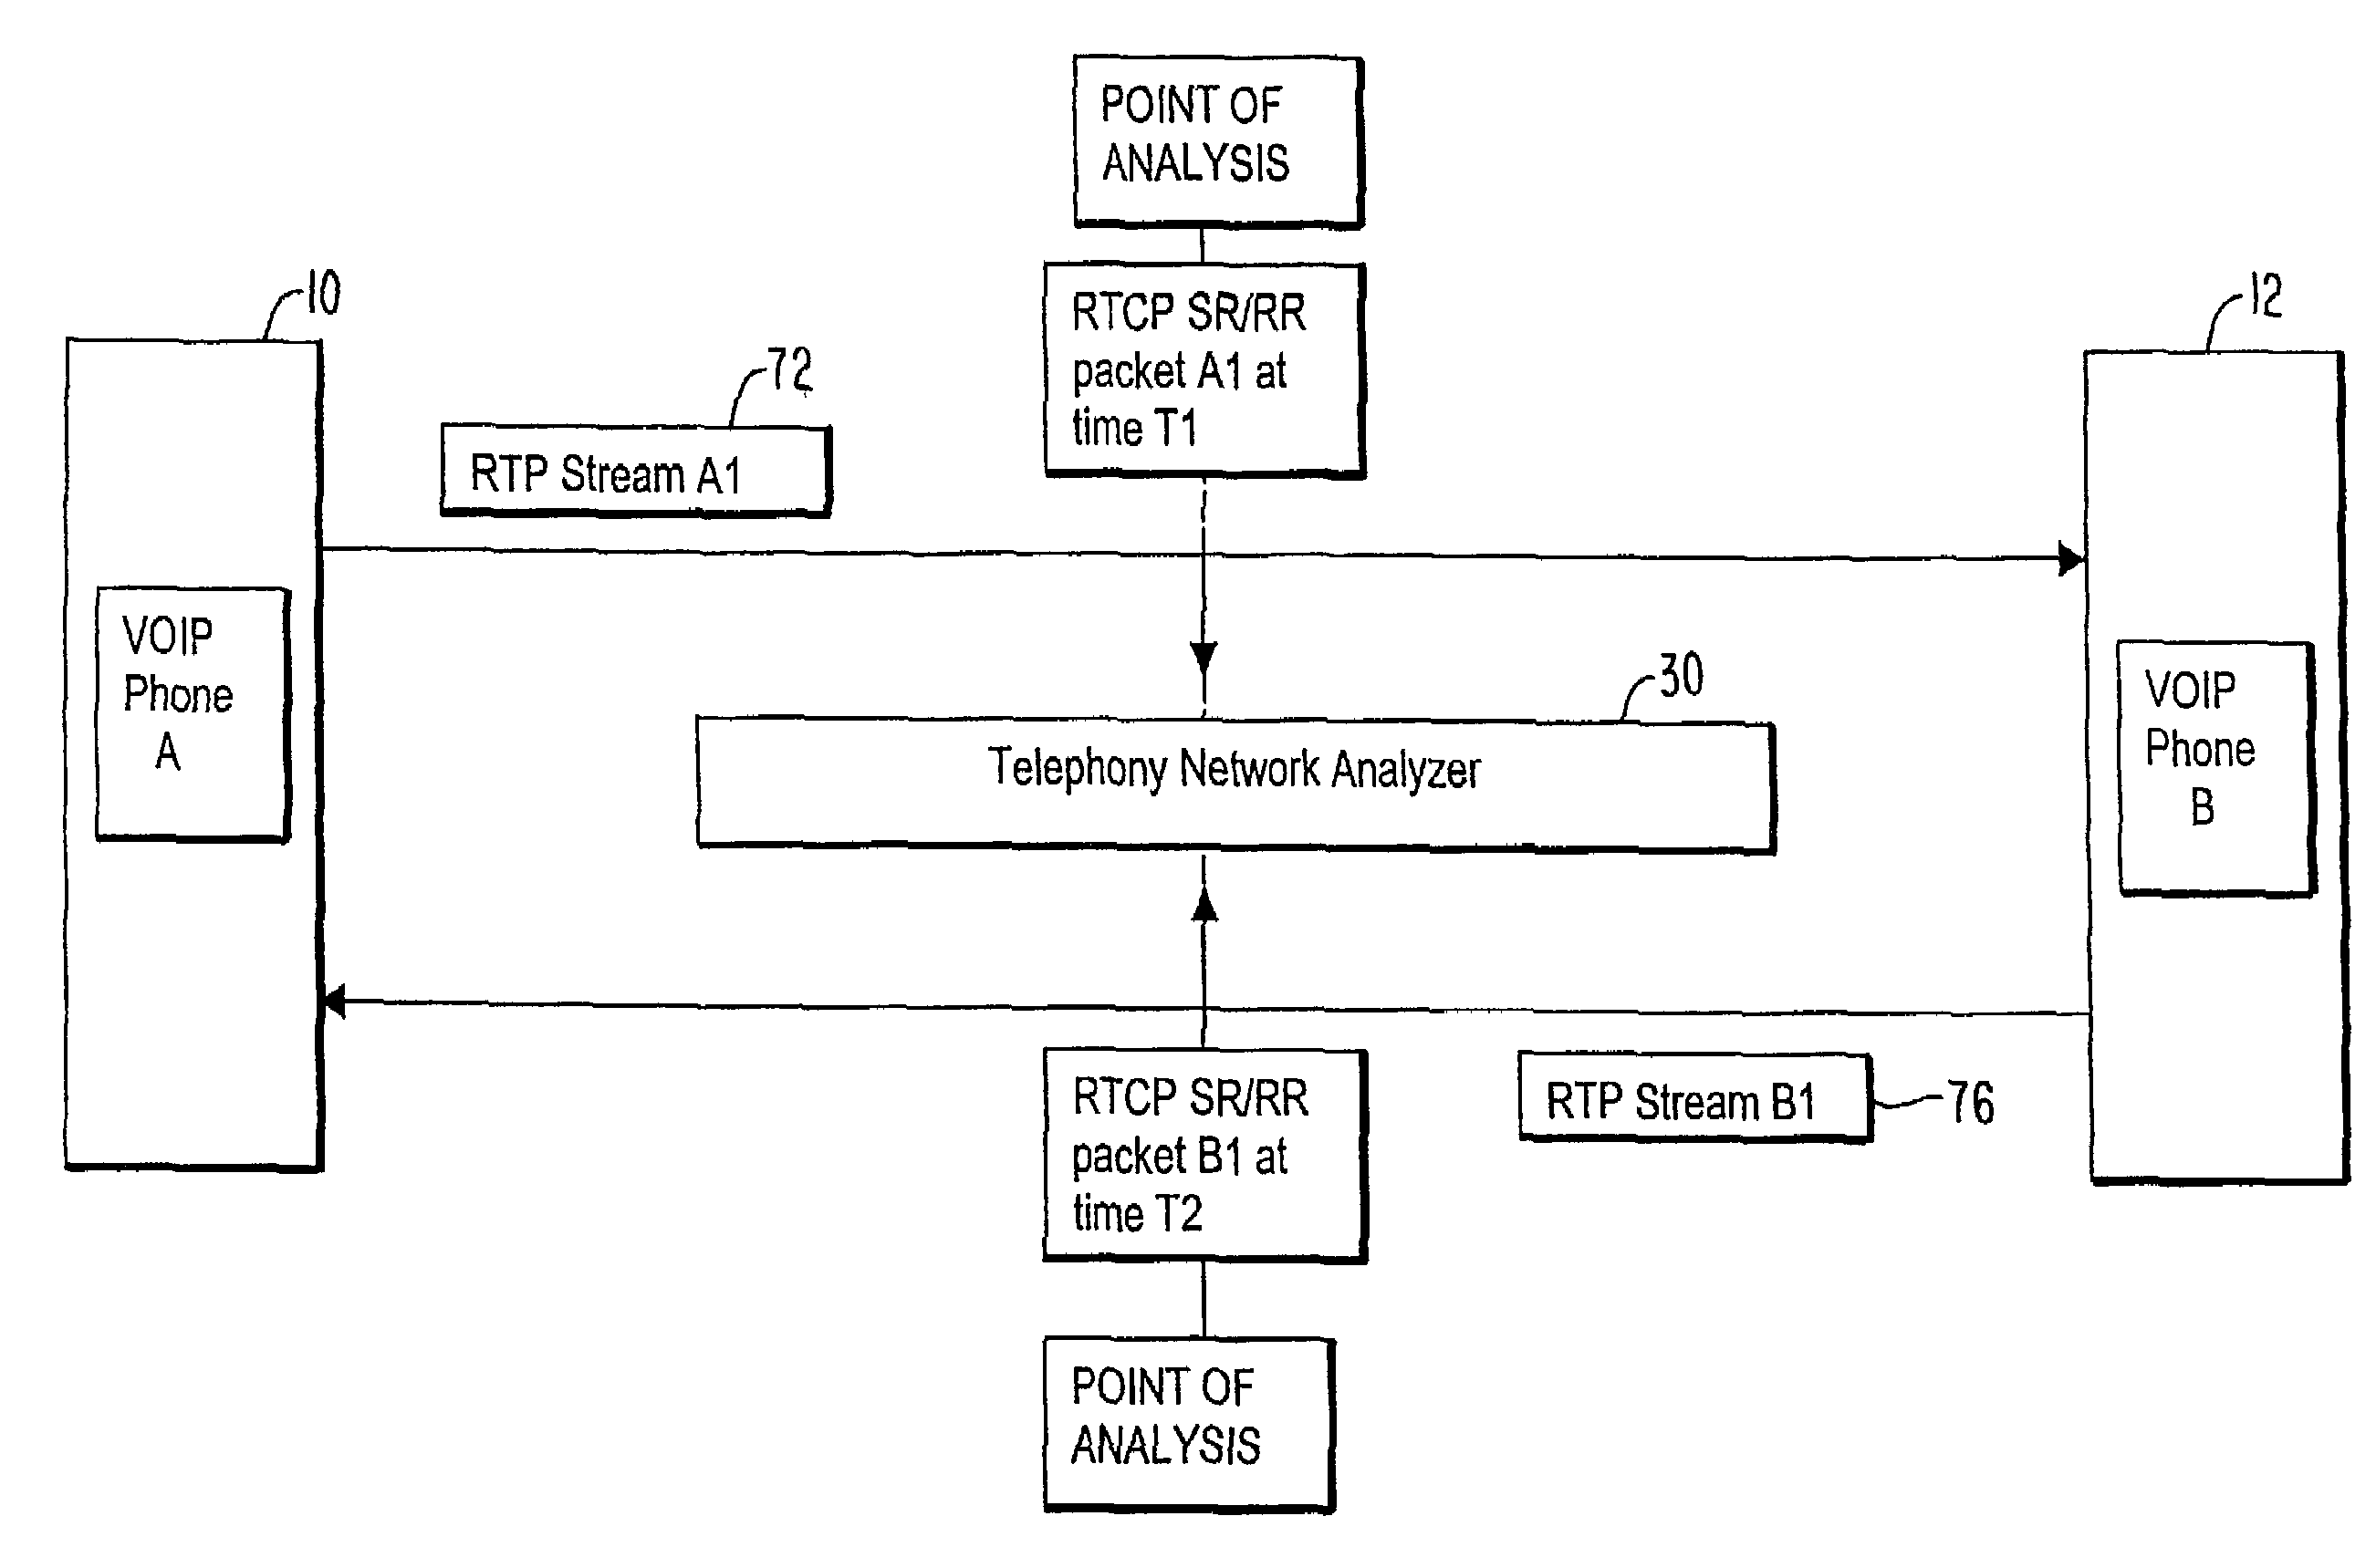 System and method to calculate round trip delay for real time protocol packet streams